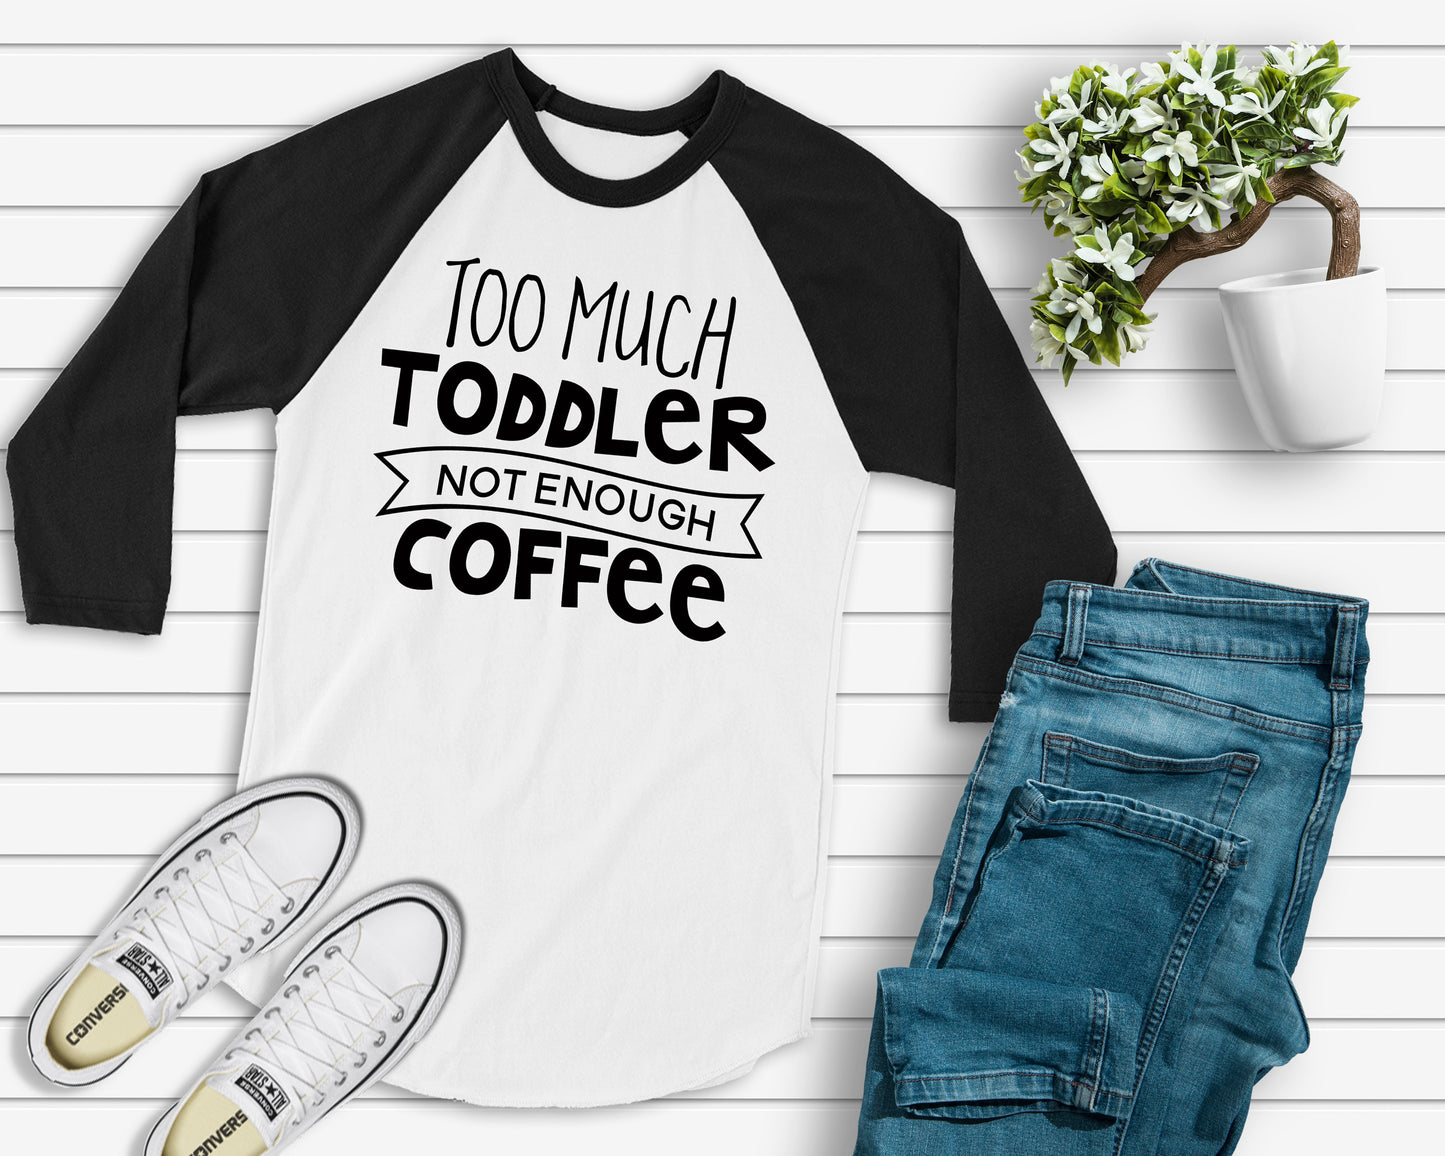 Too Much Toddler, Not Enough Coffee unisex raglan t-shirt - toddler mom shirt - terrible twos - mama needs coffee - please send coffee